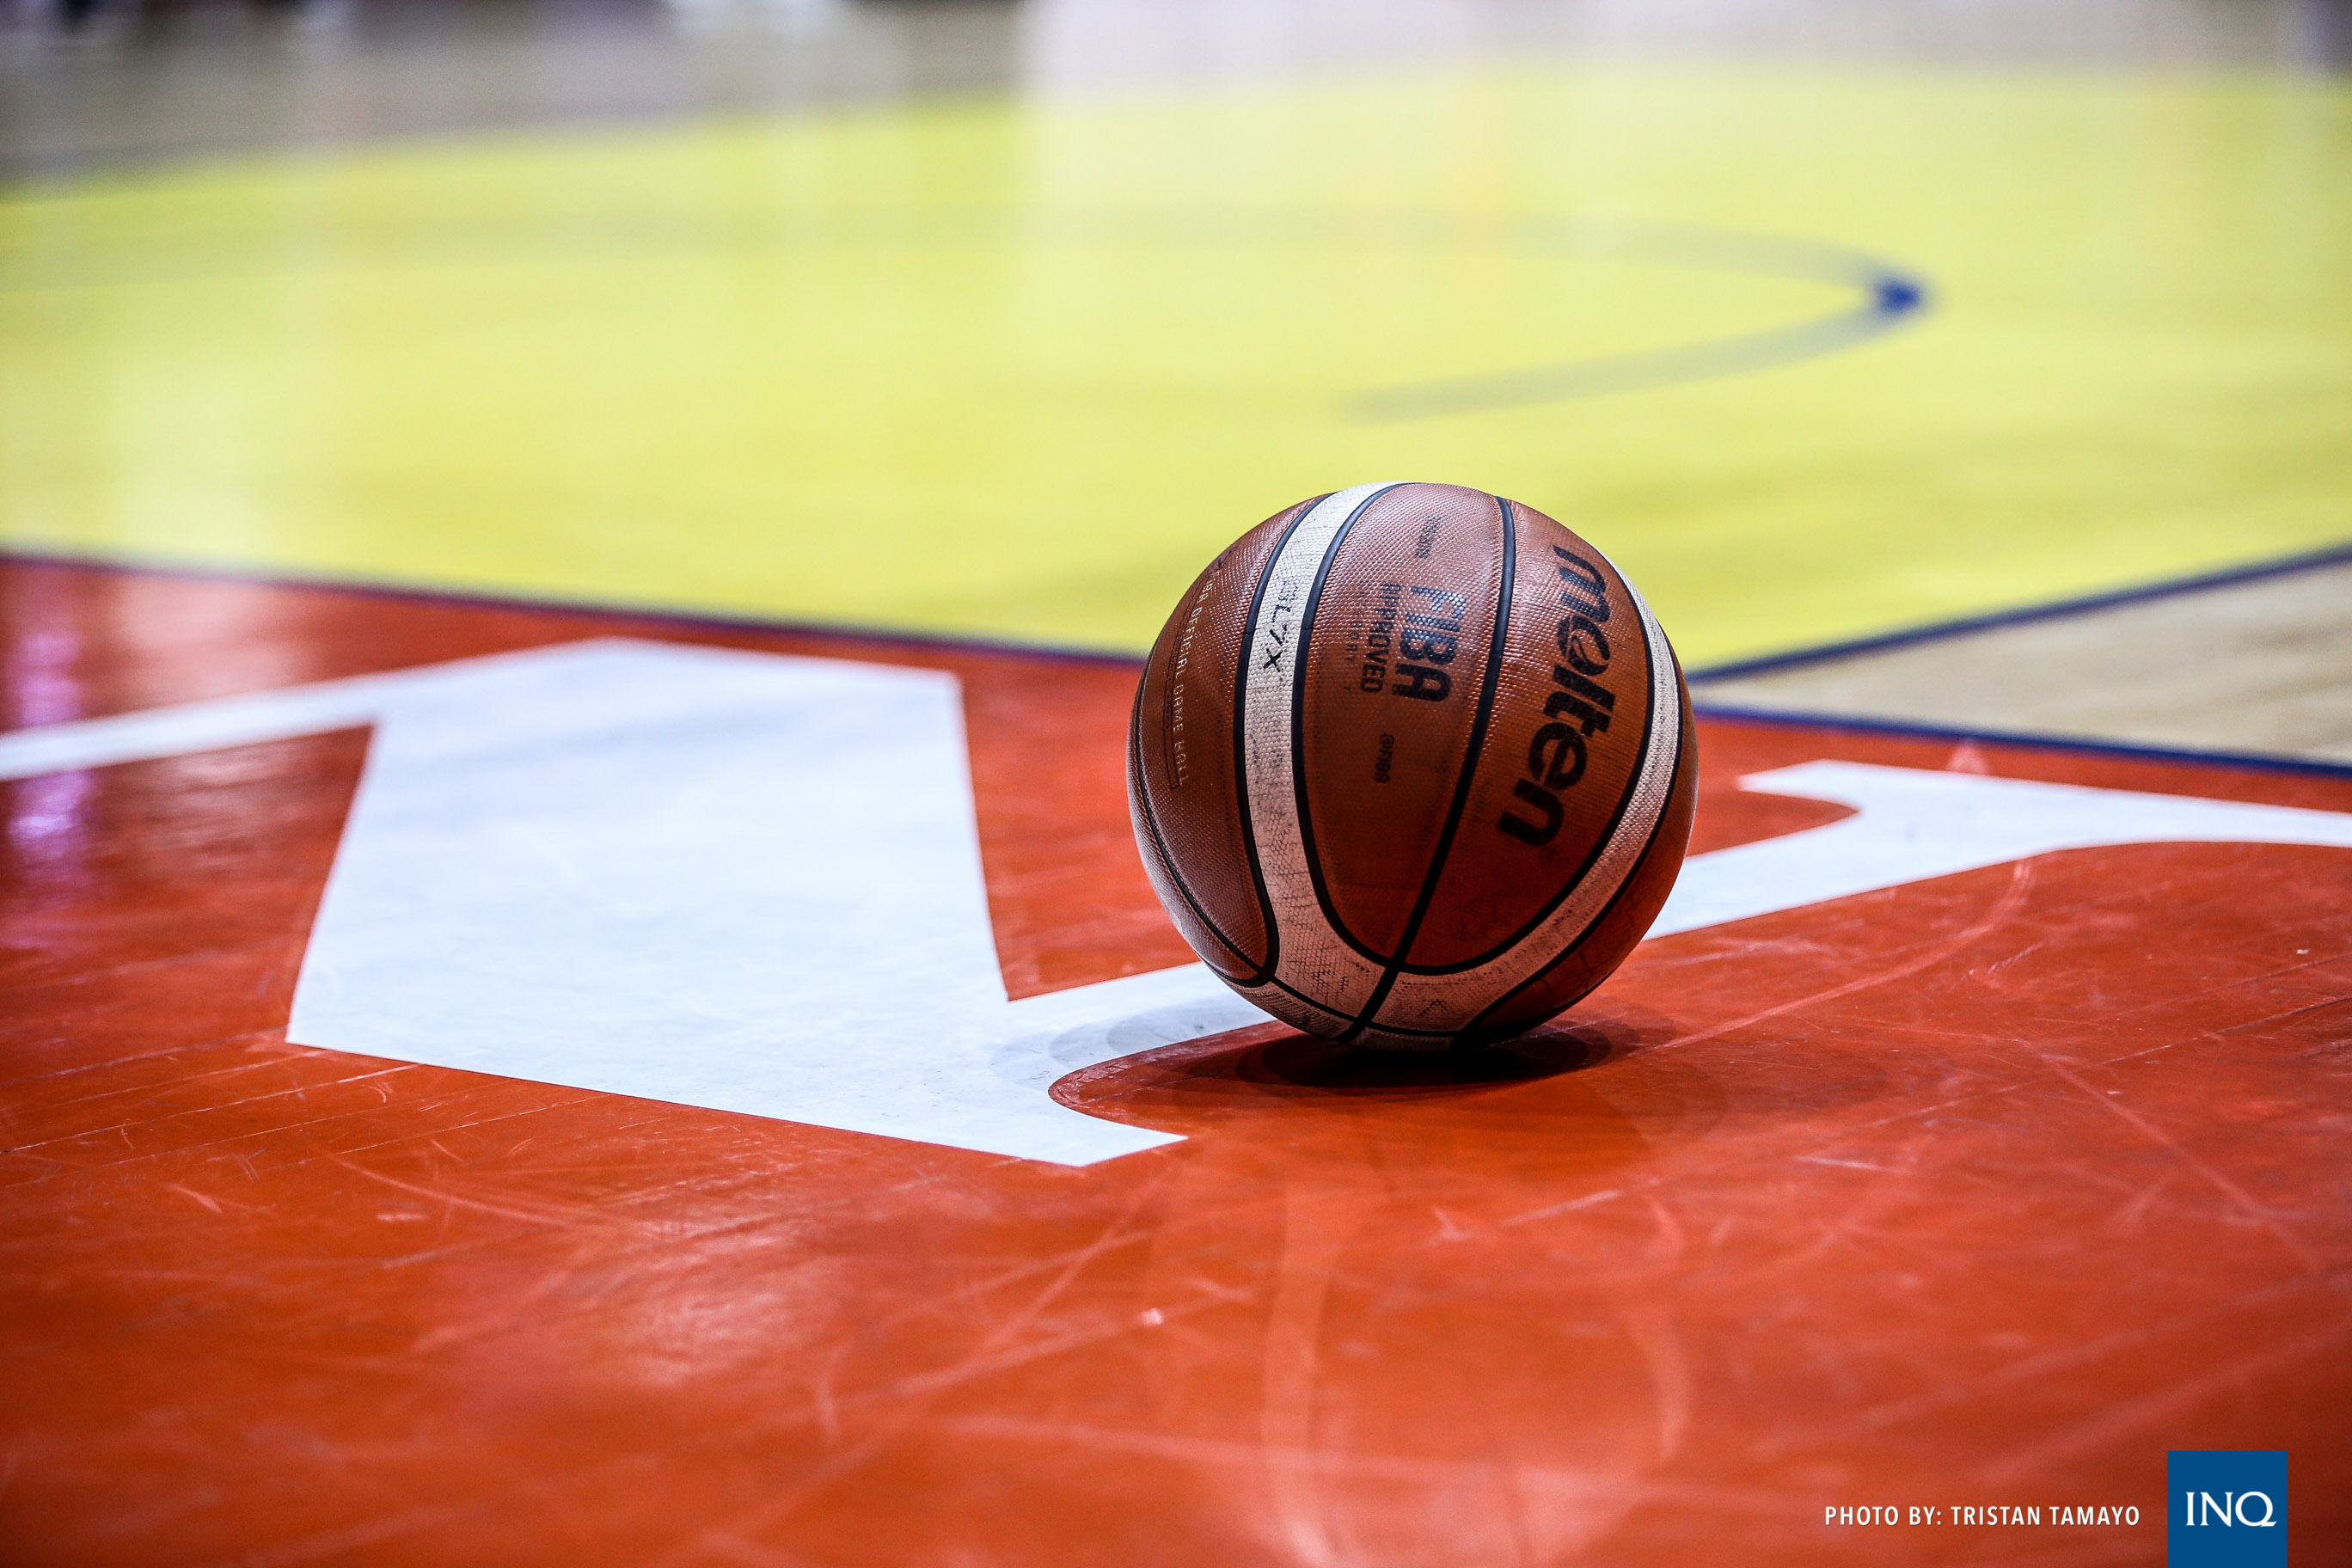 Filoil Pre-Season Cup is looking to make its return this year. 